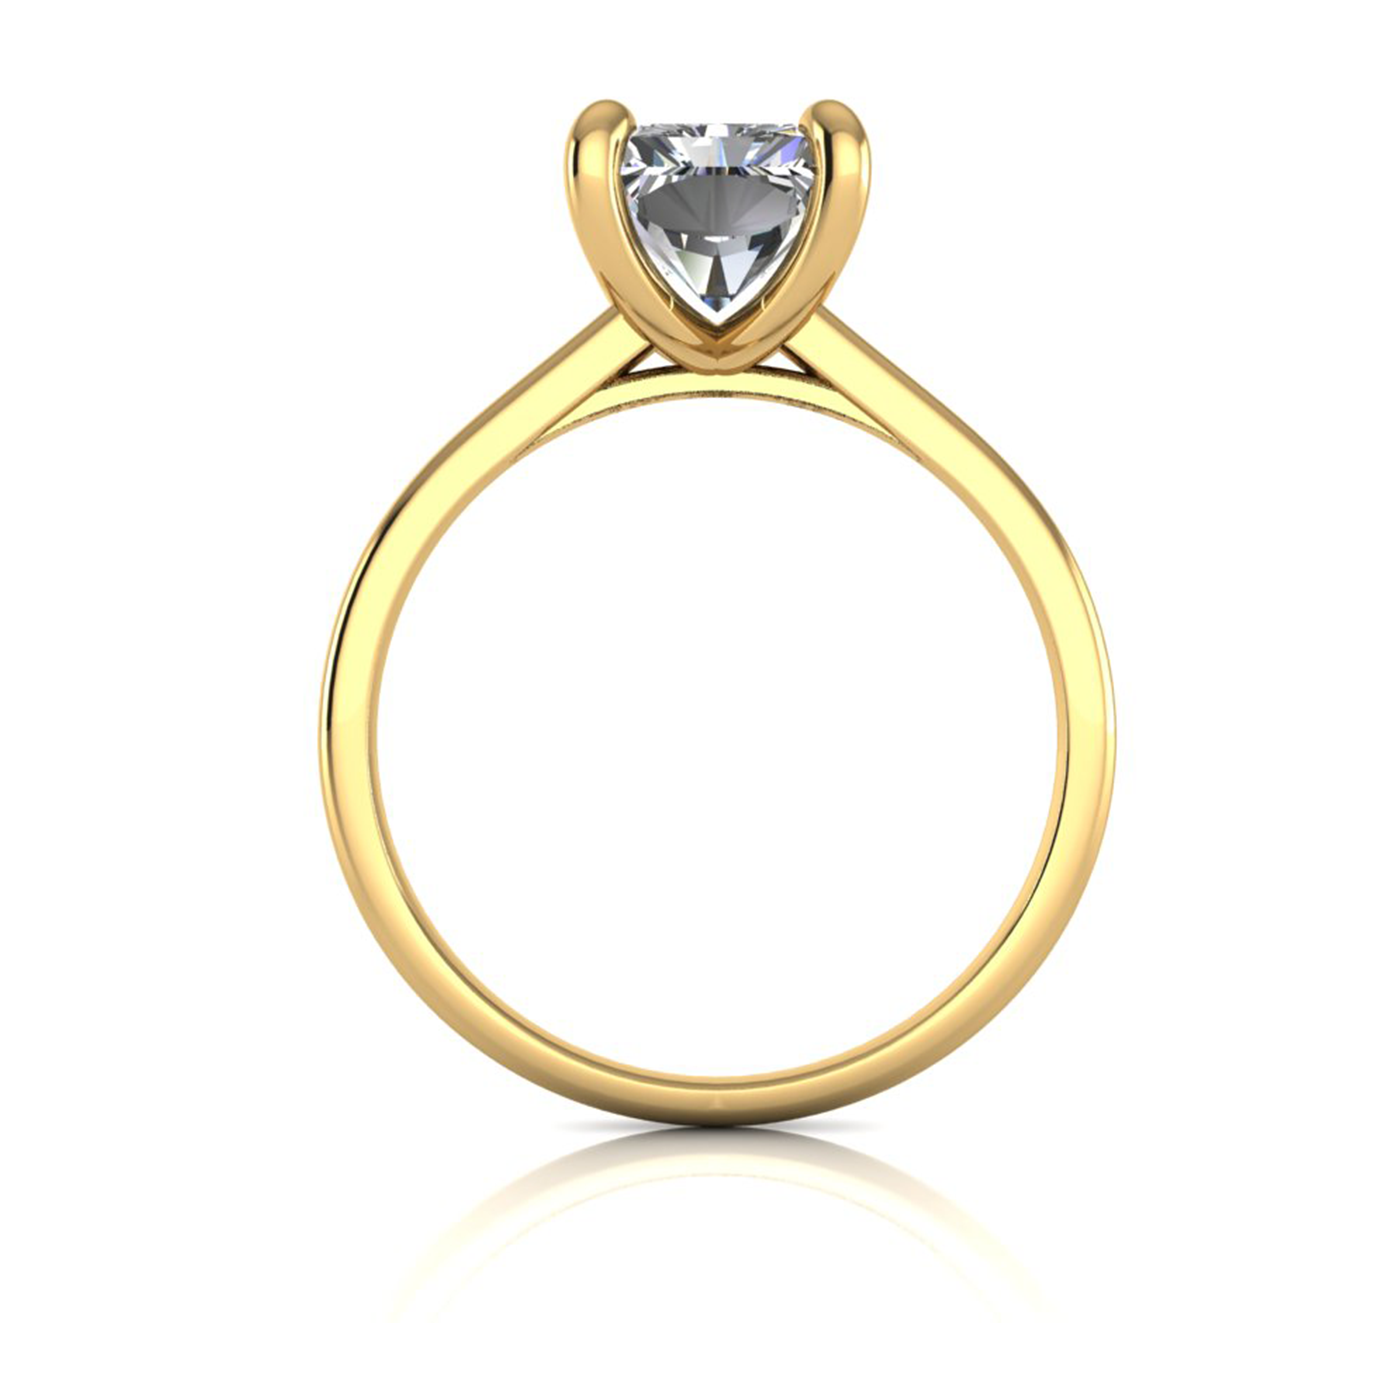 18k yellow gold  2,50 ct 4 prongs solitaire radiant cut diamond engagement ring with whisper thin band